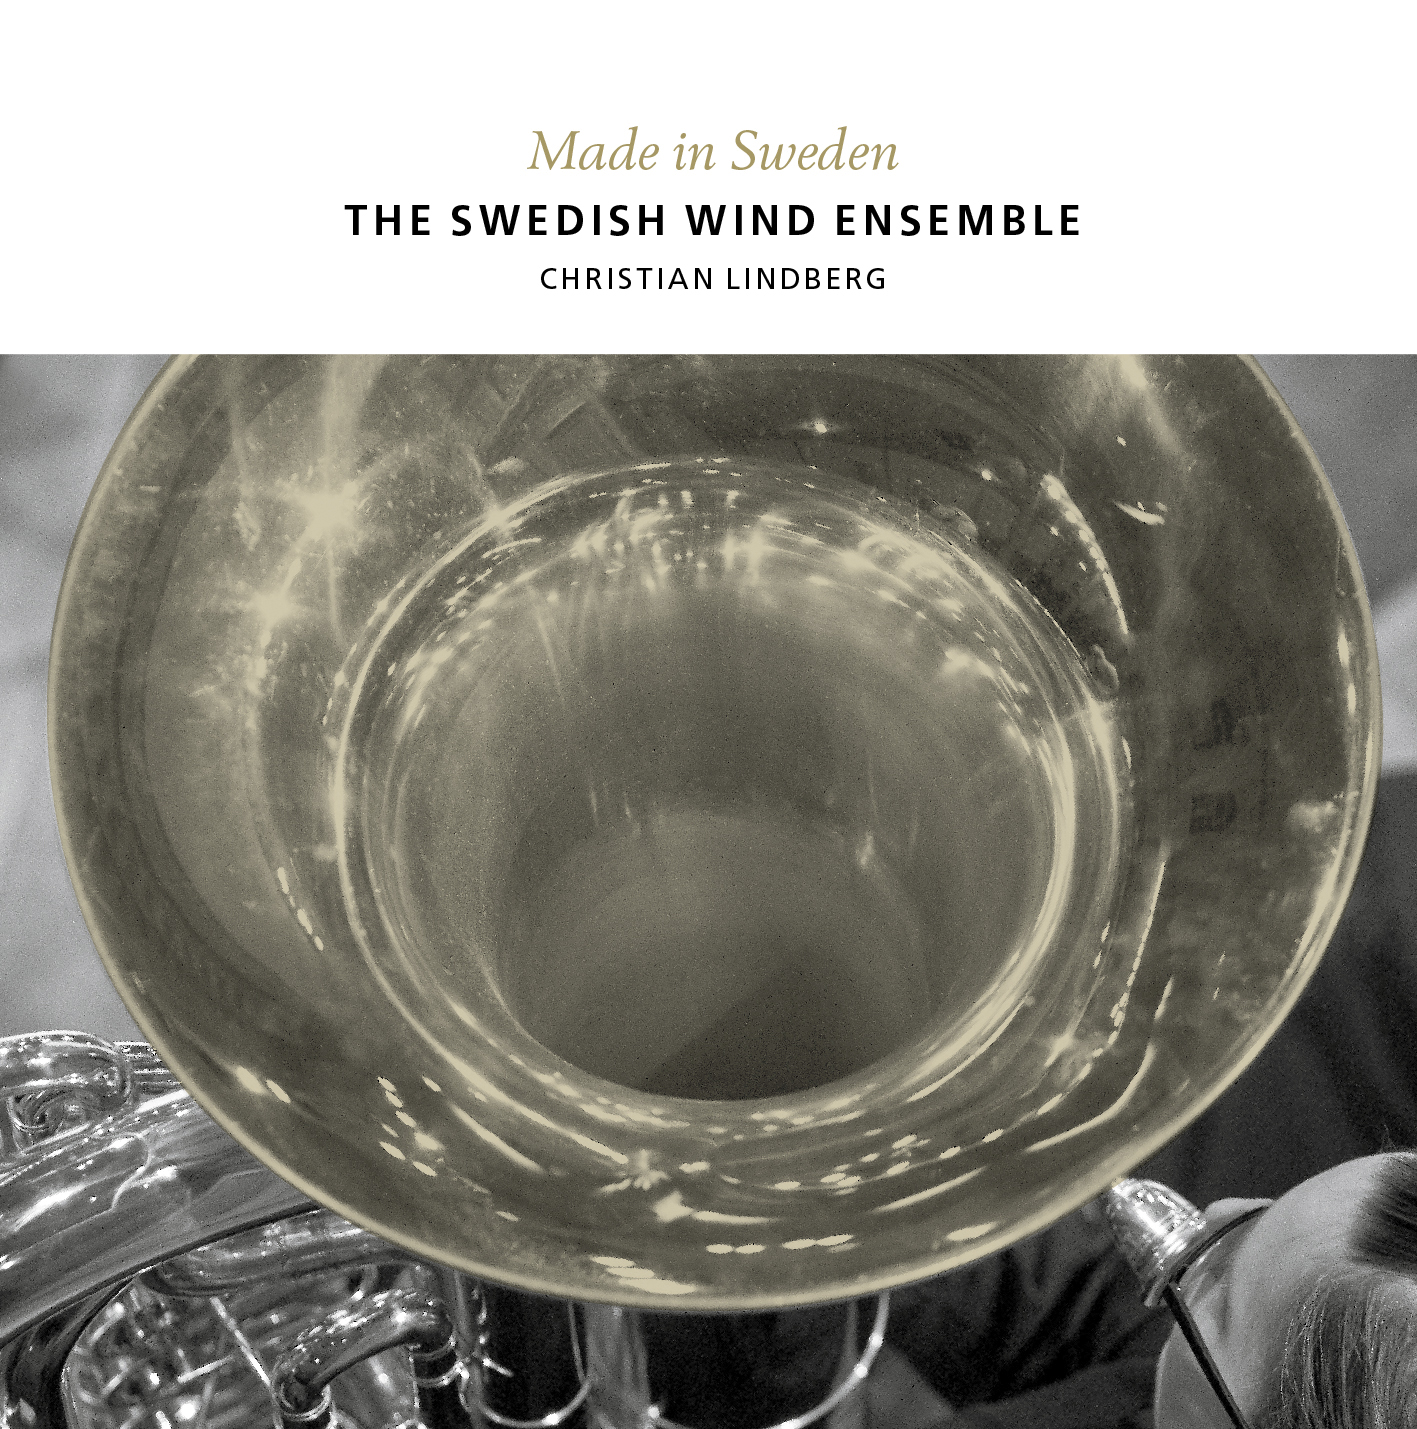 The Swedish Wind Ensemble: Made in Sweden